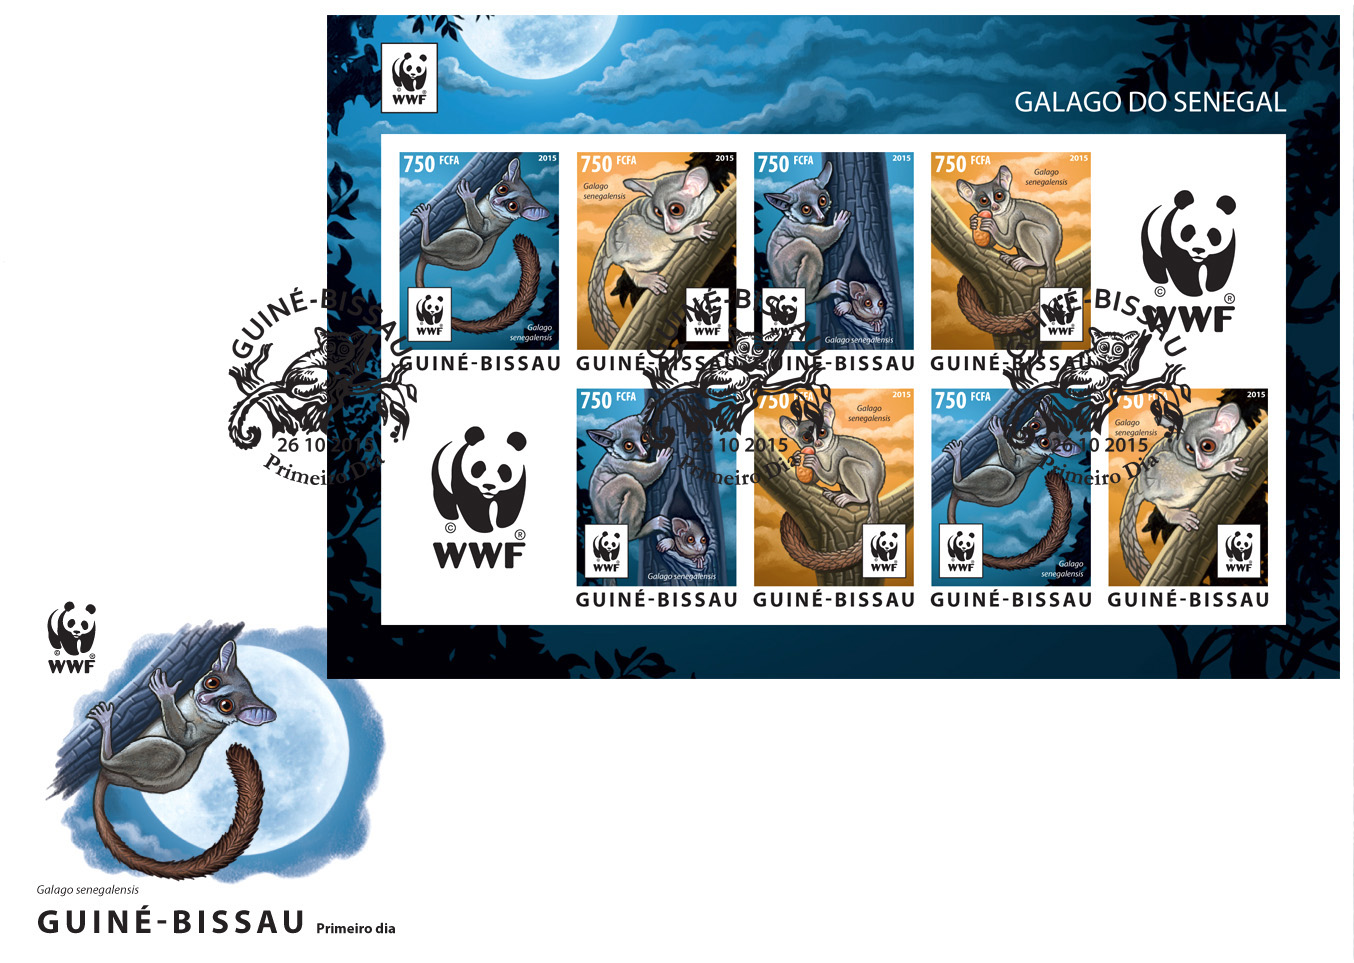 WWF – Galago (FDC imperf.) - Issue of Guinée-Bissau postage stamps